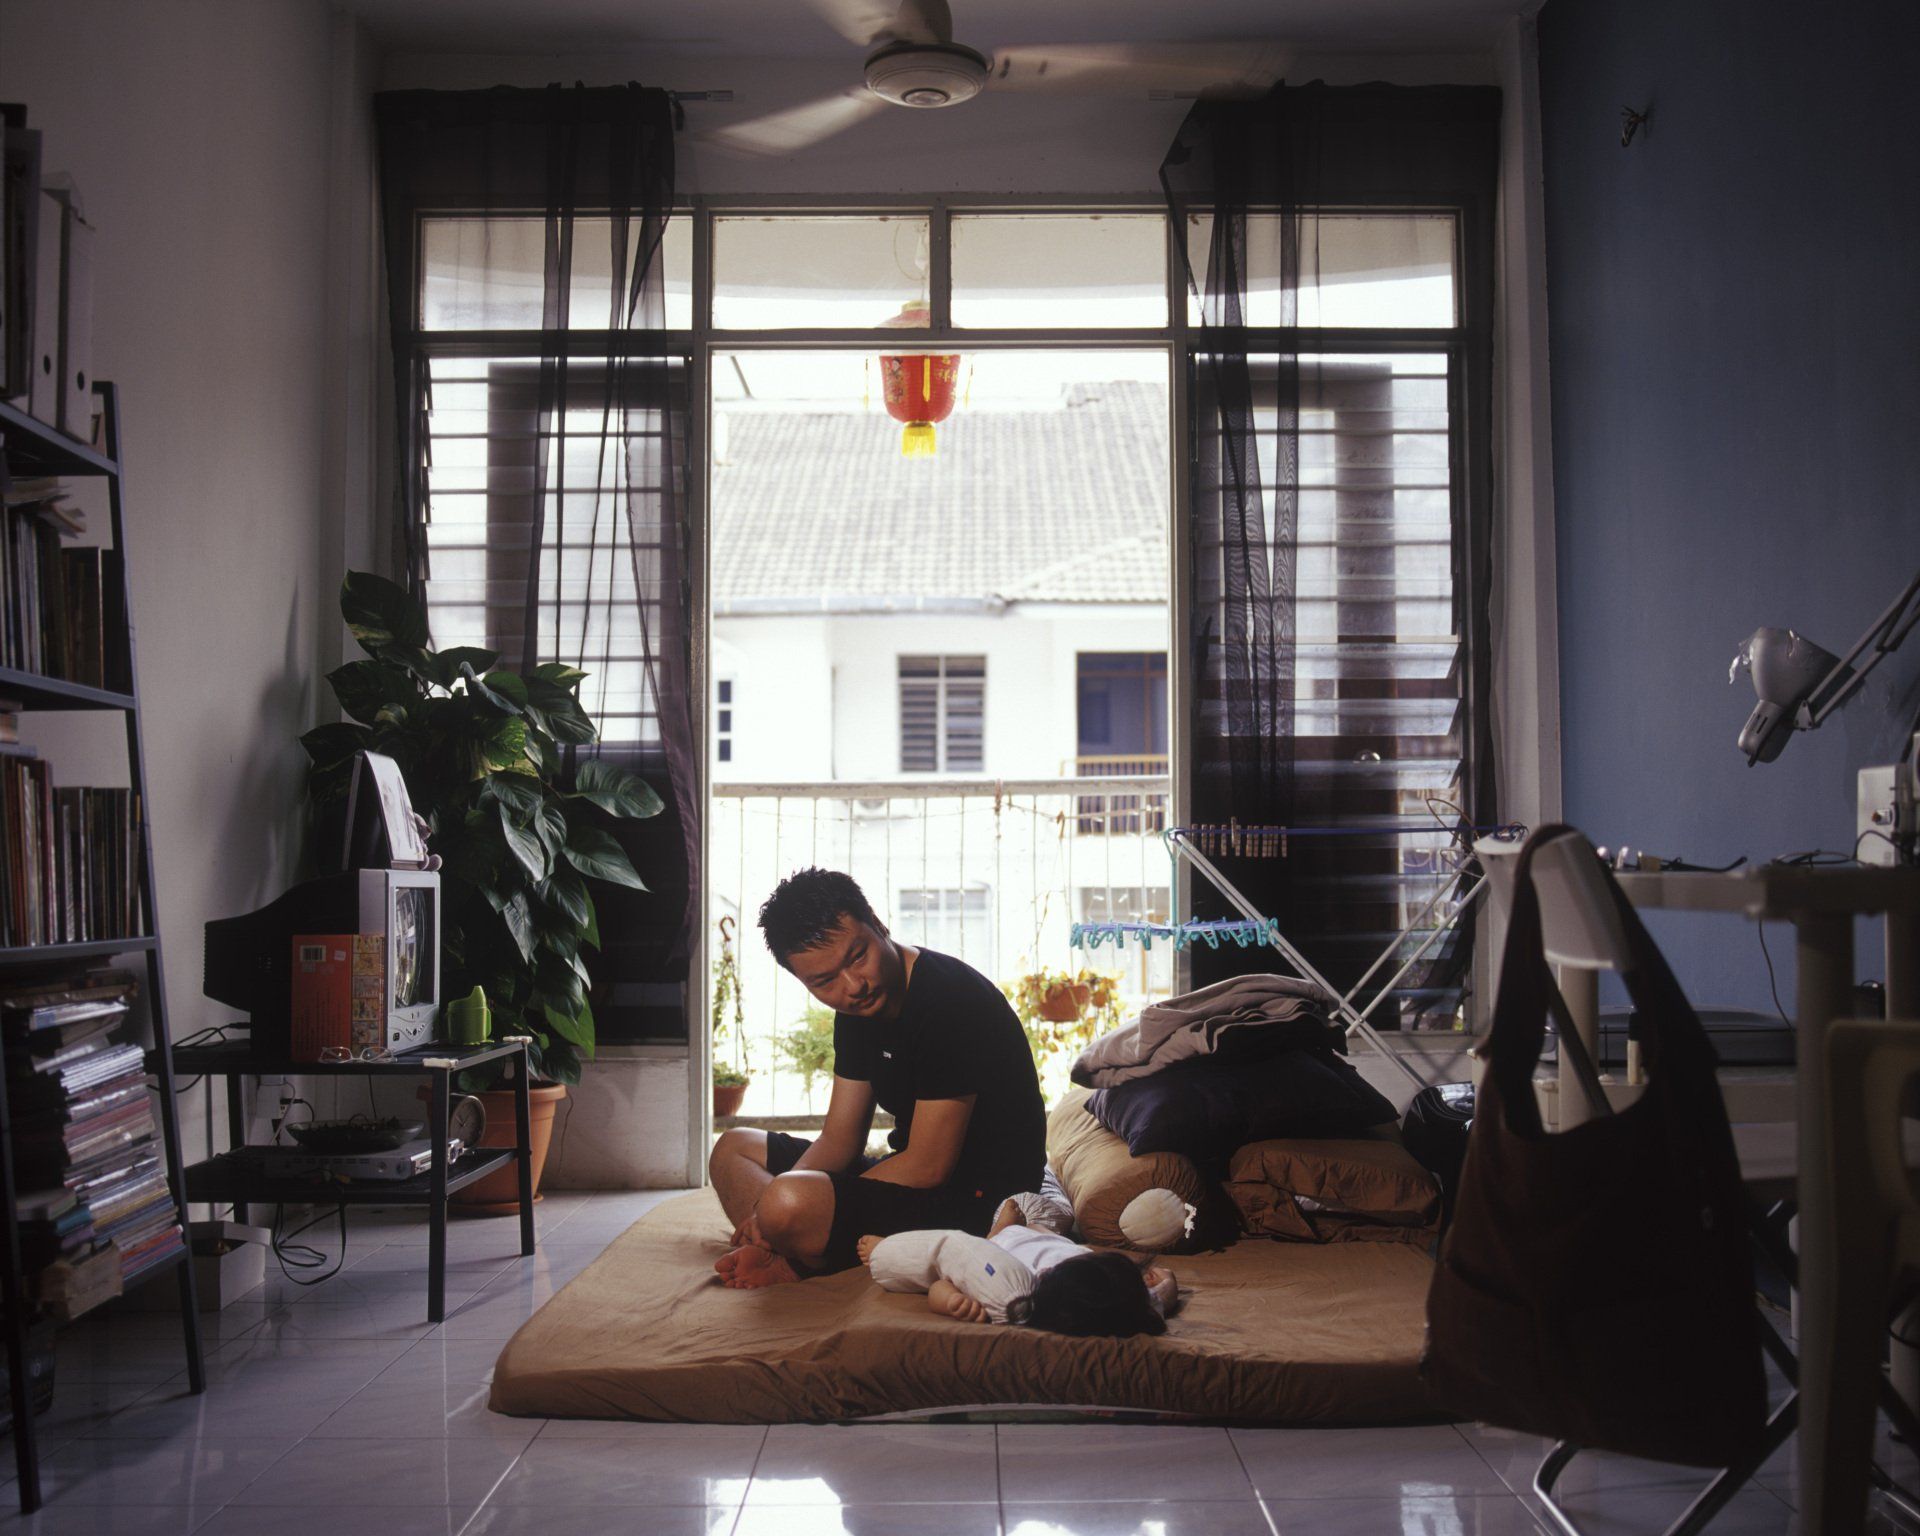 “Ah Lok”, from the project “Convergence,”  Penang, Malaysia, 2010.  80x100cm